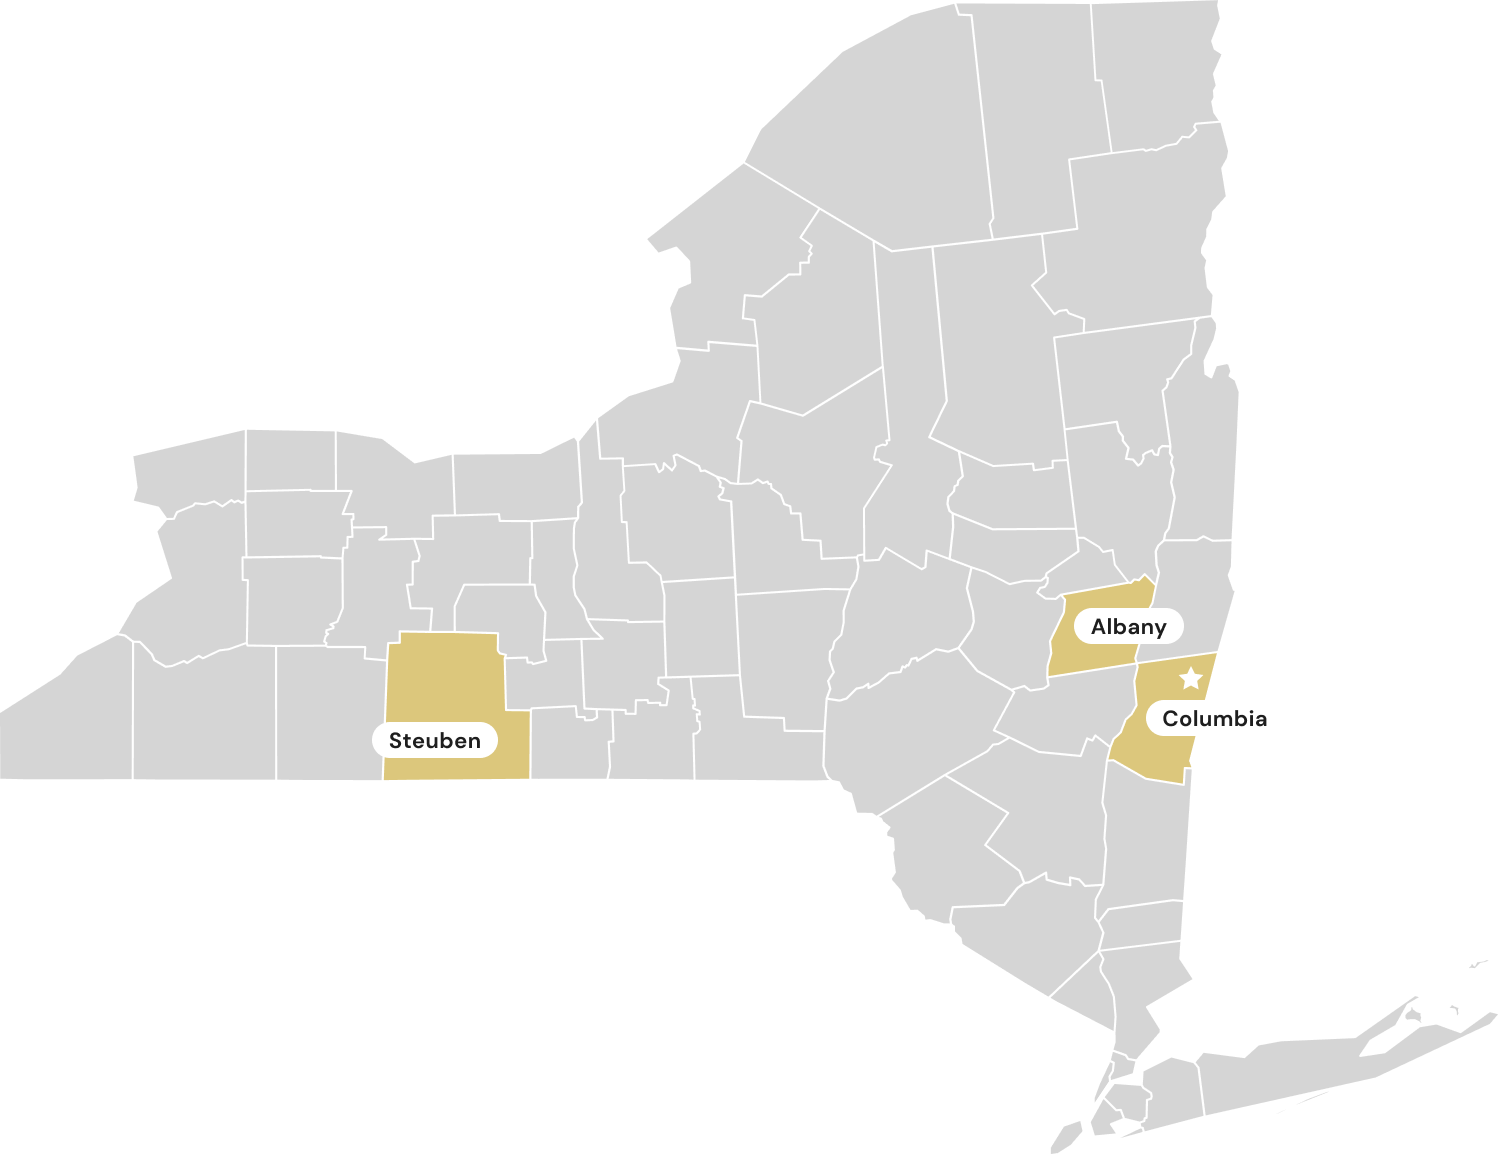 A map of New York state highlighting three counties in light yellow: Steuben in the southwestern region, Albany in the eastern central region, and Columbia in the southeastern region. Albany is marked with a star.